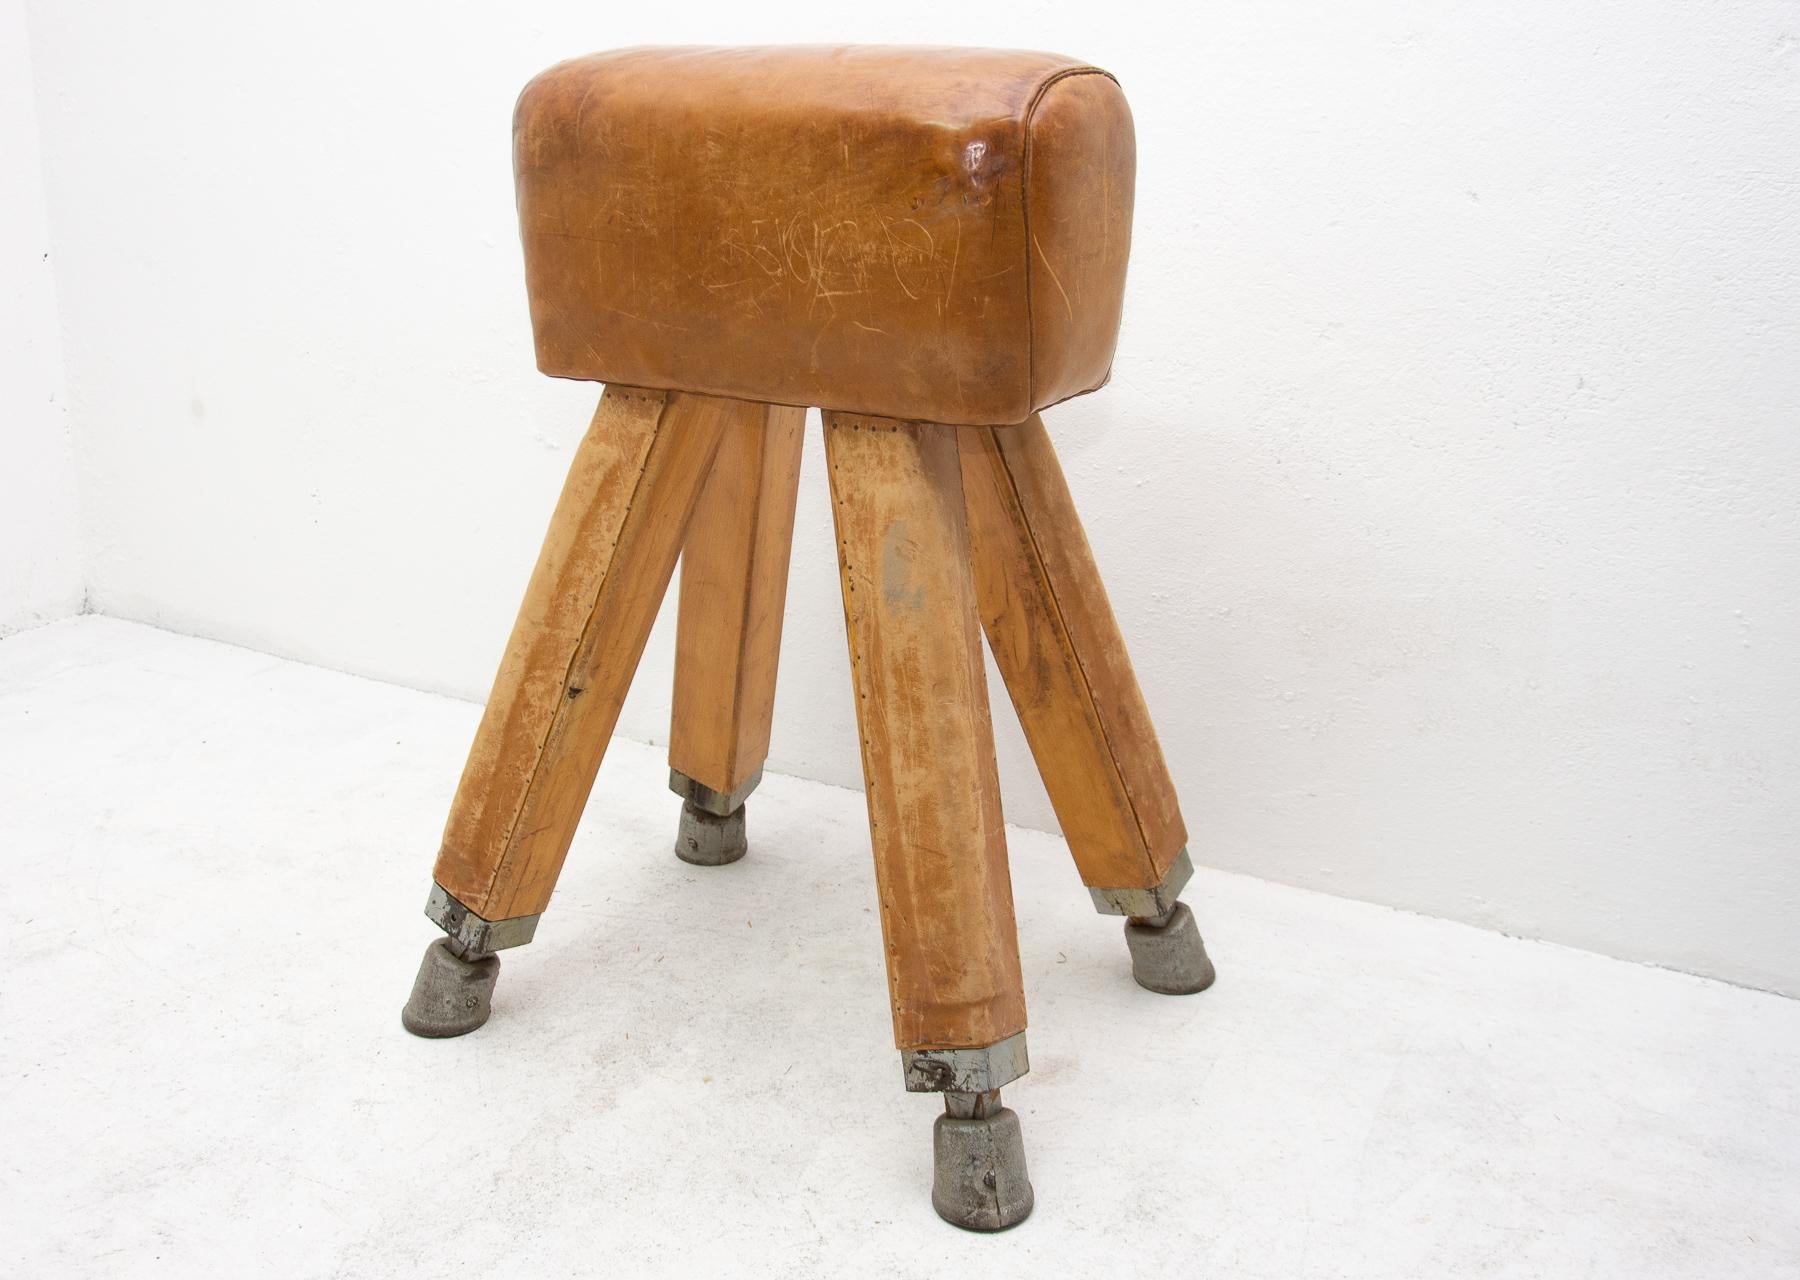 This original gym pommel horse from the 1930s features a beech frame and cow leather upholstery. The positioning legs on the outside are also covered with leather and the hooves are made of cast iron. This item is in good Vintage condition, but it